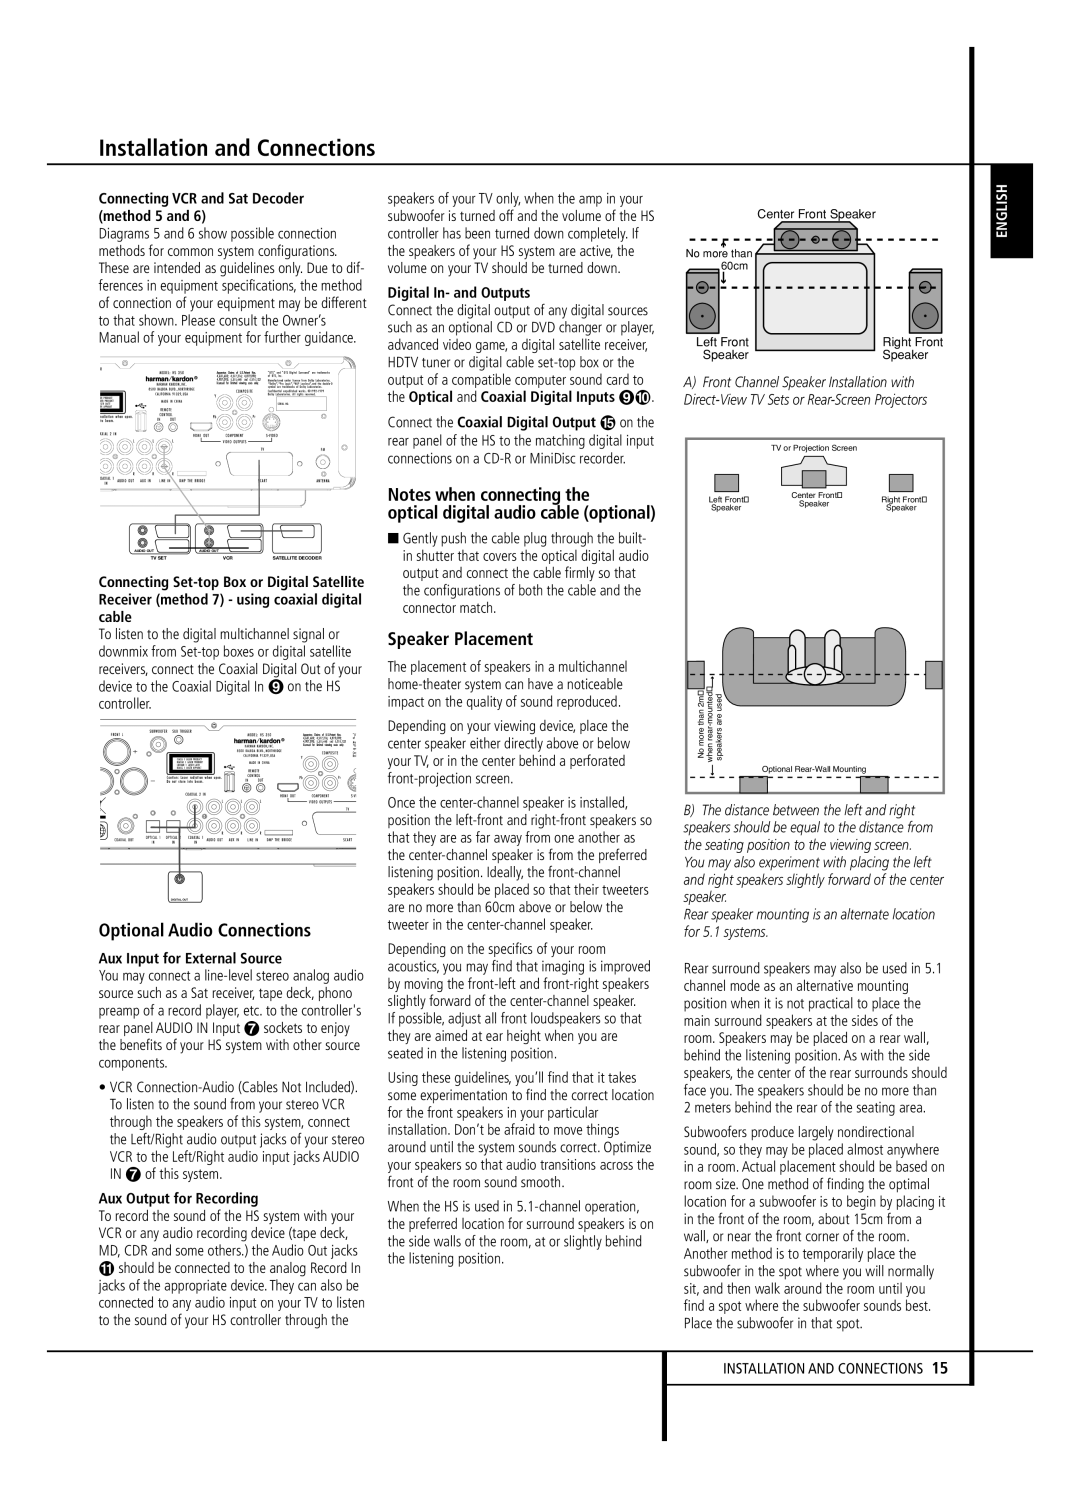 Harman-Kardon HS 350 owner manual Optional Audio Connections, Notes when connecting the, Speaker Placement, English 